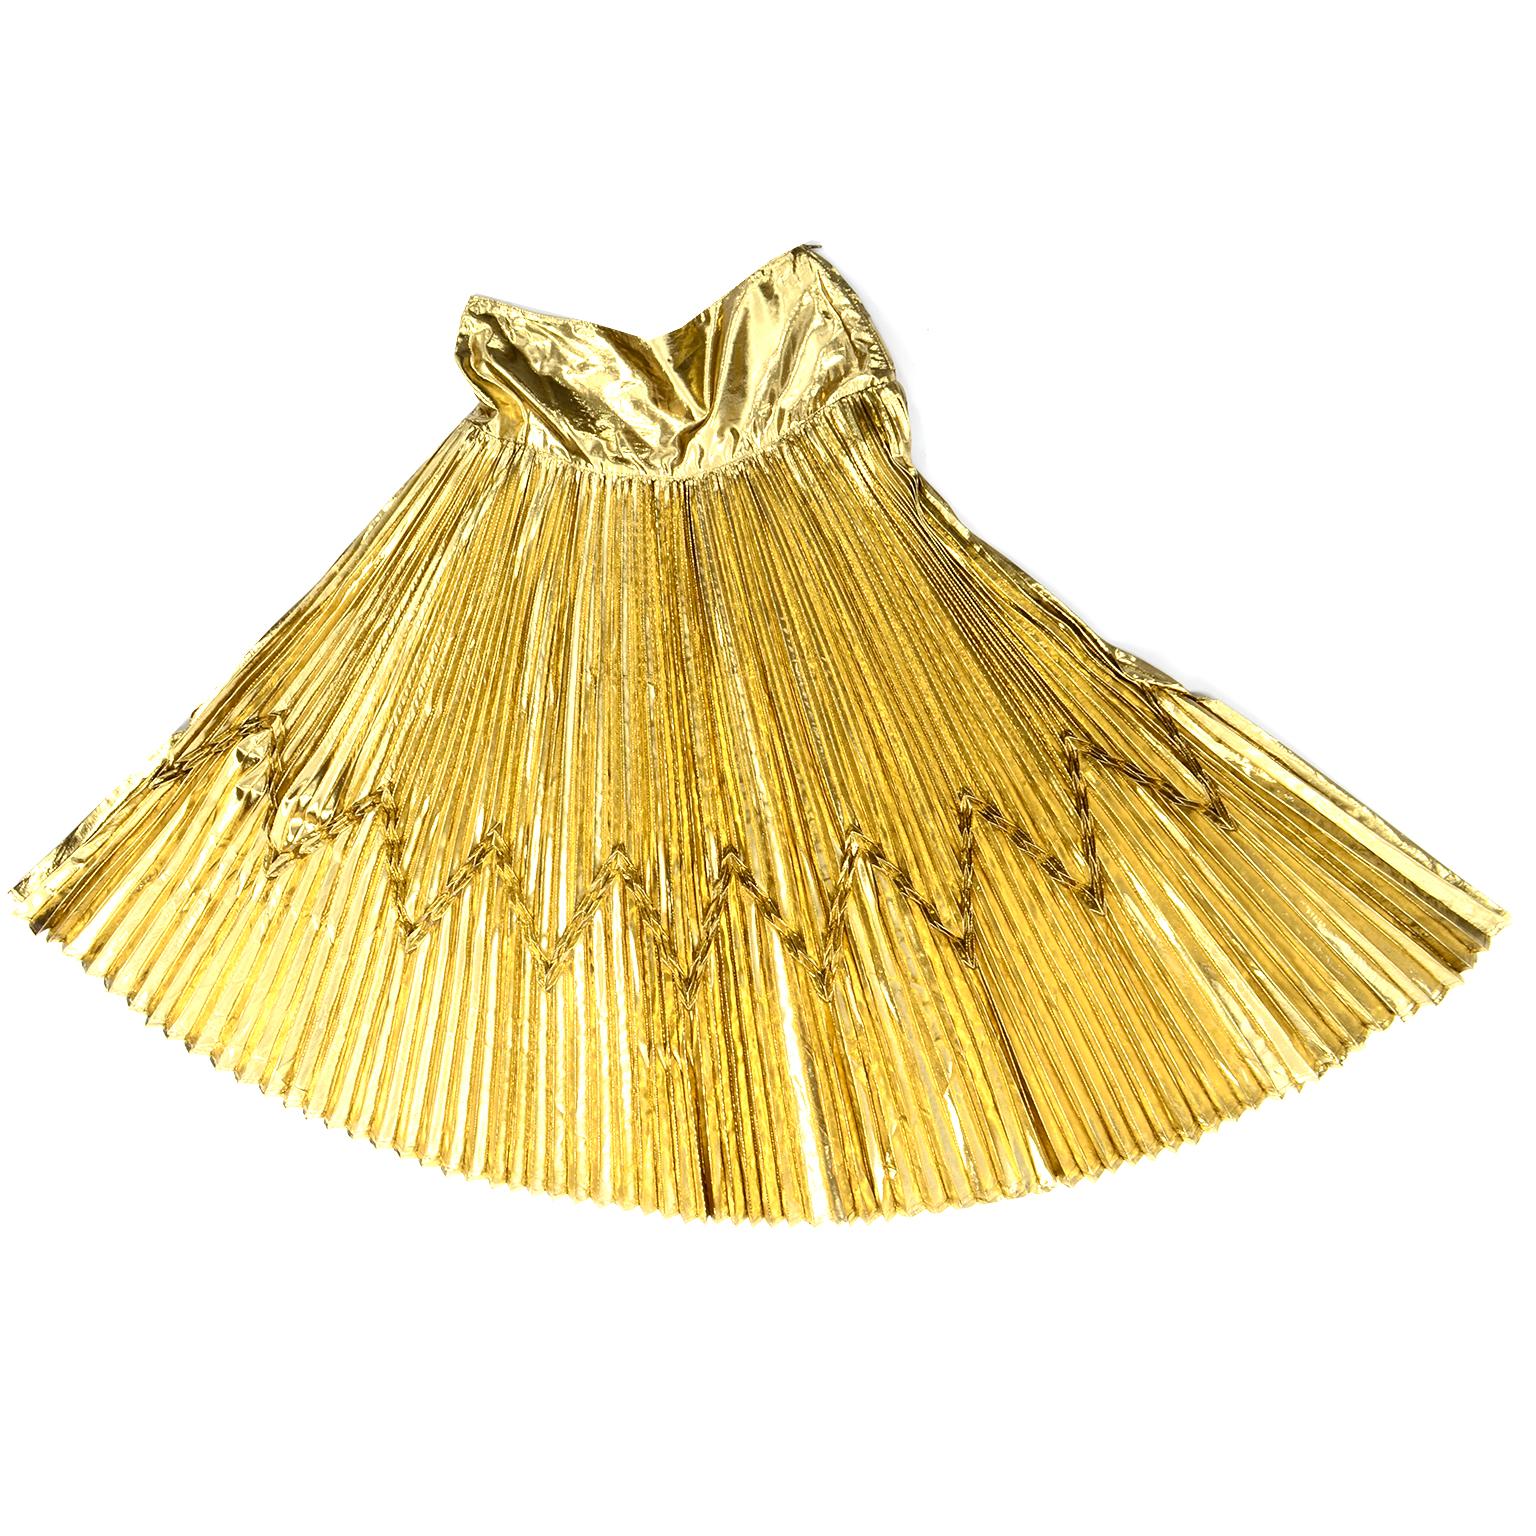 This is a truly stunning vintage gold lurex 1990's Gianni Versace for Genny accordion pleated skirt. We love the unique raised details that form a chevron pattern along the pleating. This could be worn with so many pieces you already have in your